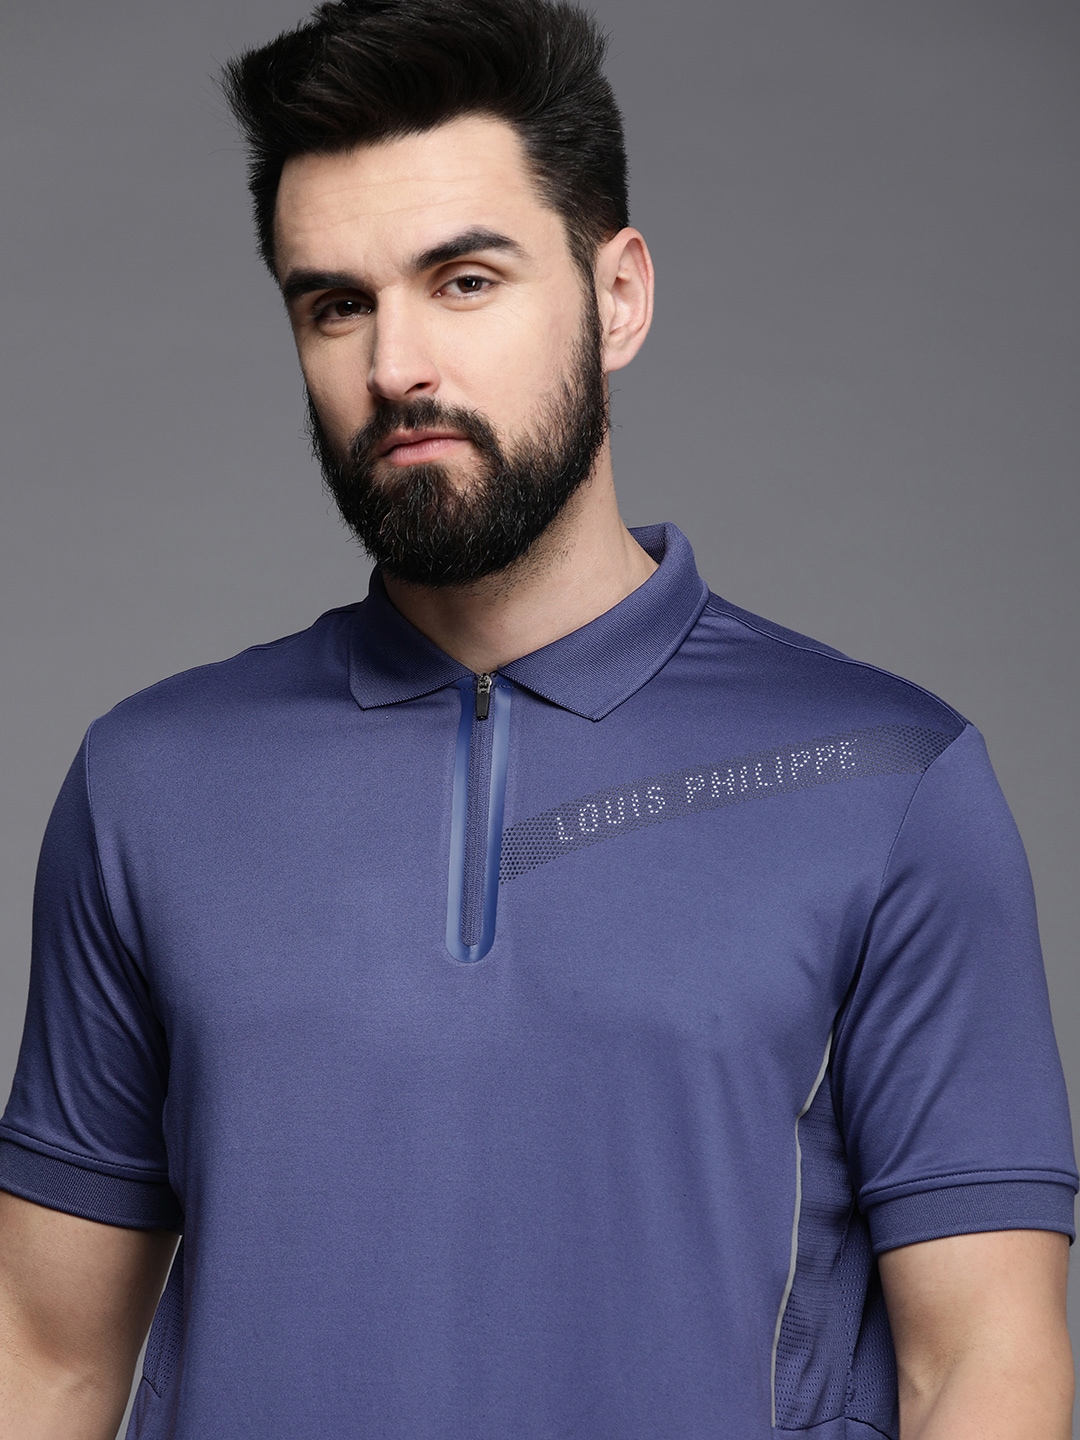 Buy Louis Philippe Athplay Solid Polyester Regular Fit Men's T-Shirt - Blue  at Redfynd